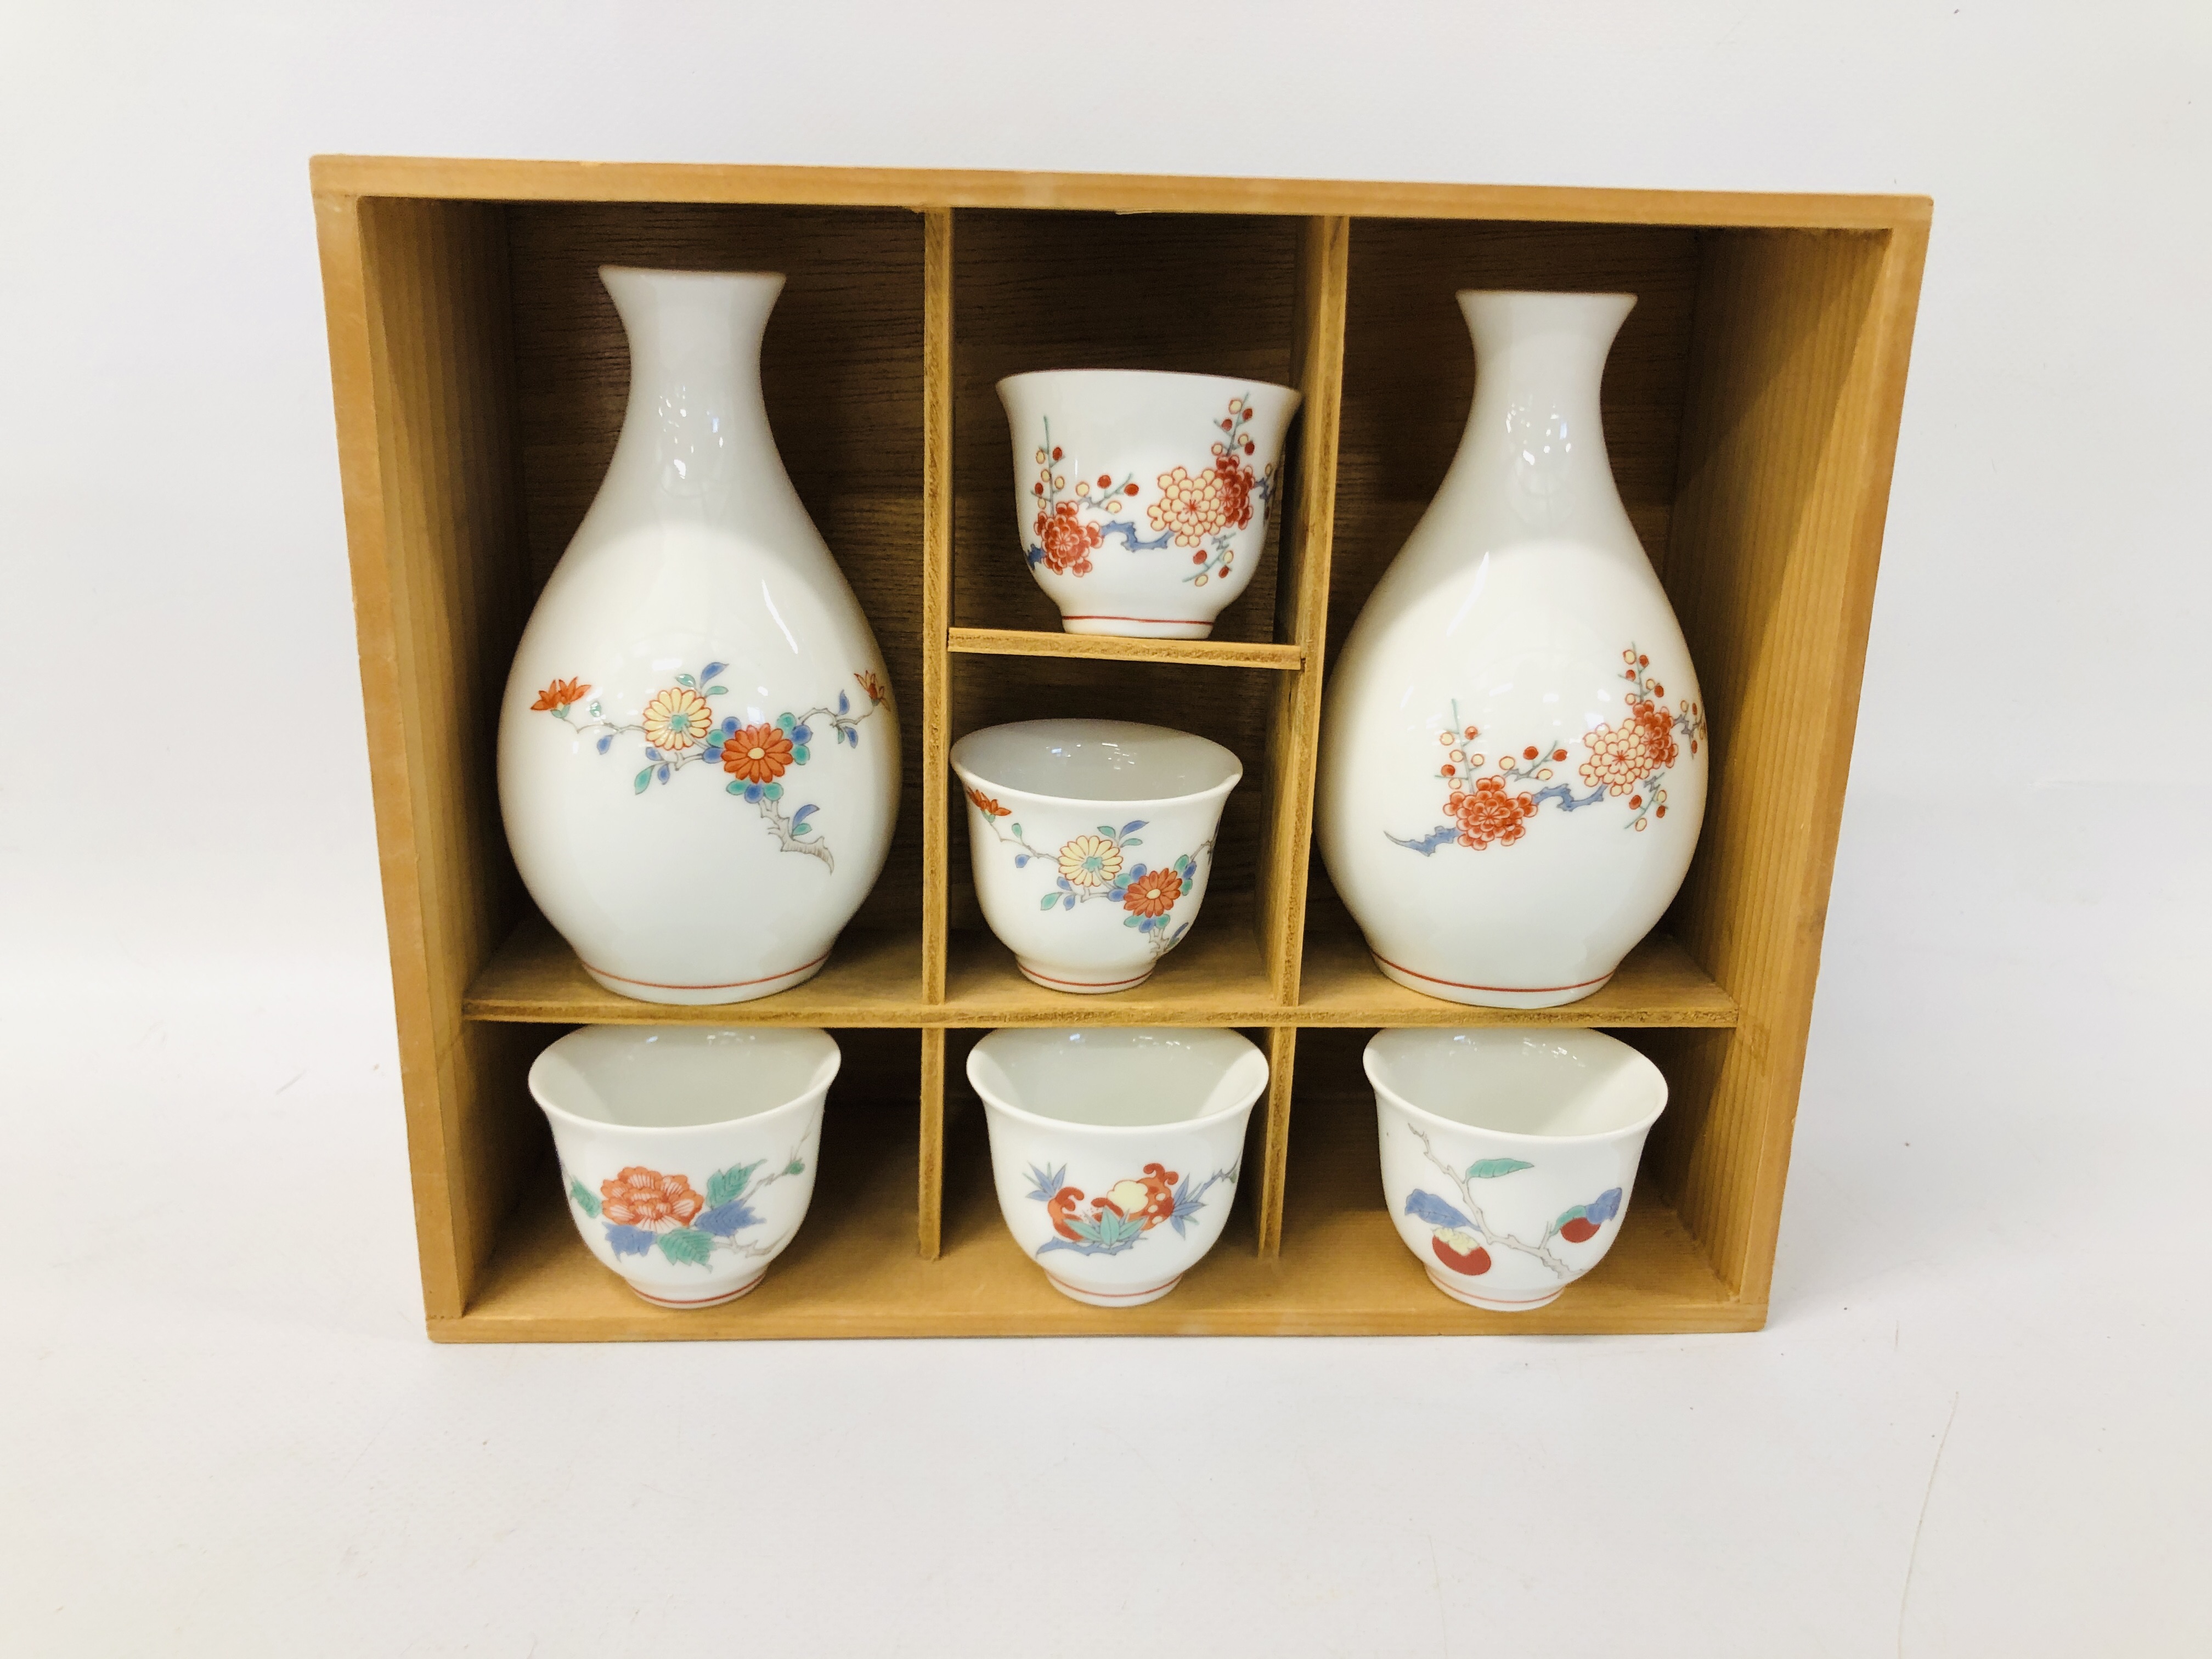 FINE 20TH CENTURY JAPANESE KAKIEMON SAKE SET COMPRISING TWO FLASKS AND FIVE CUPS IN ORIGINAL BOX.